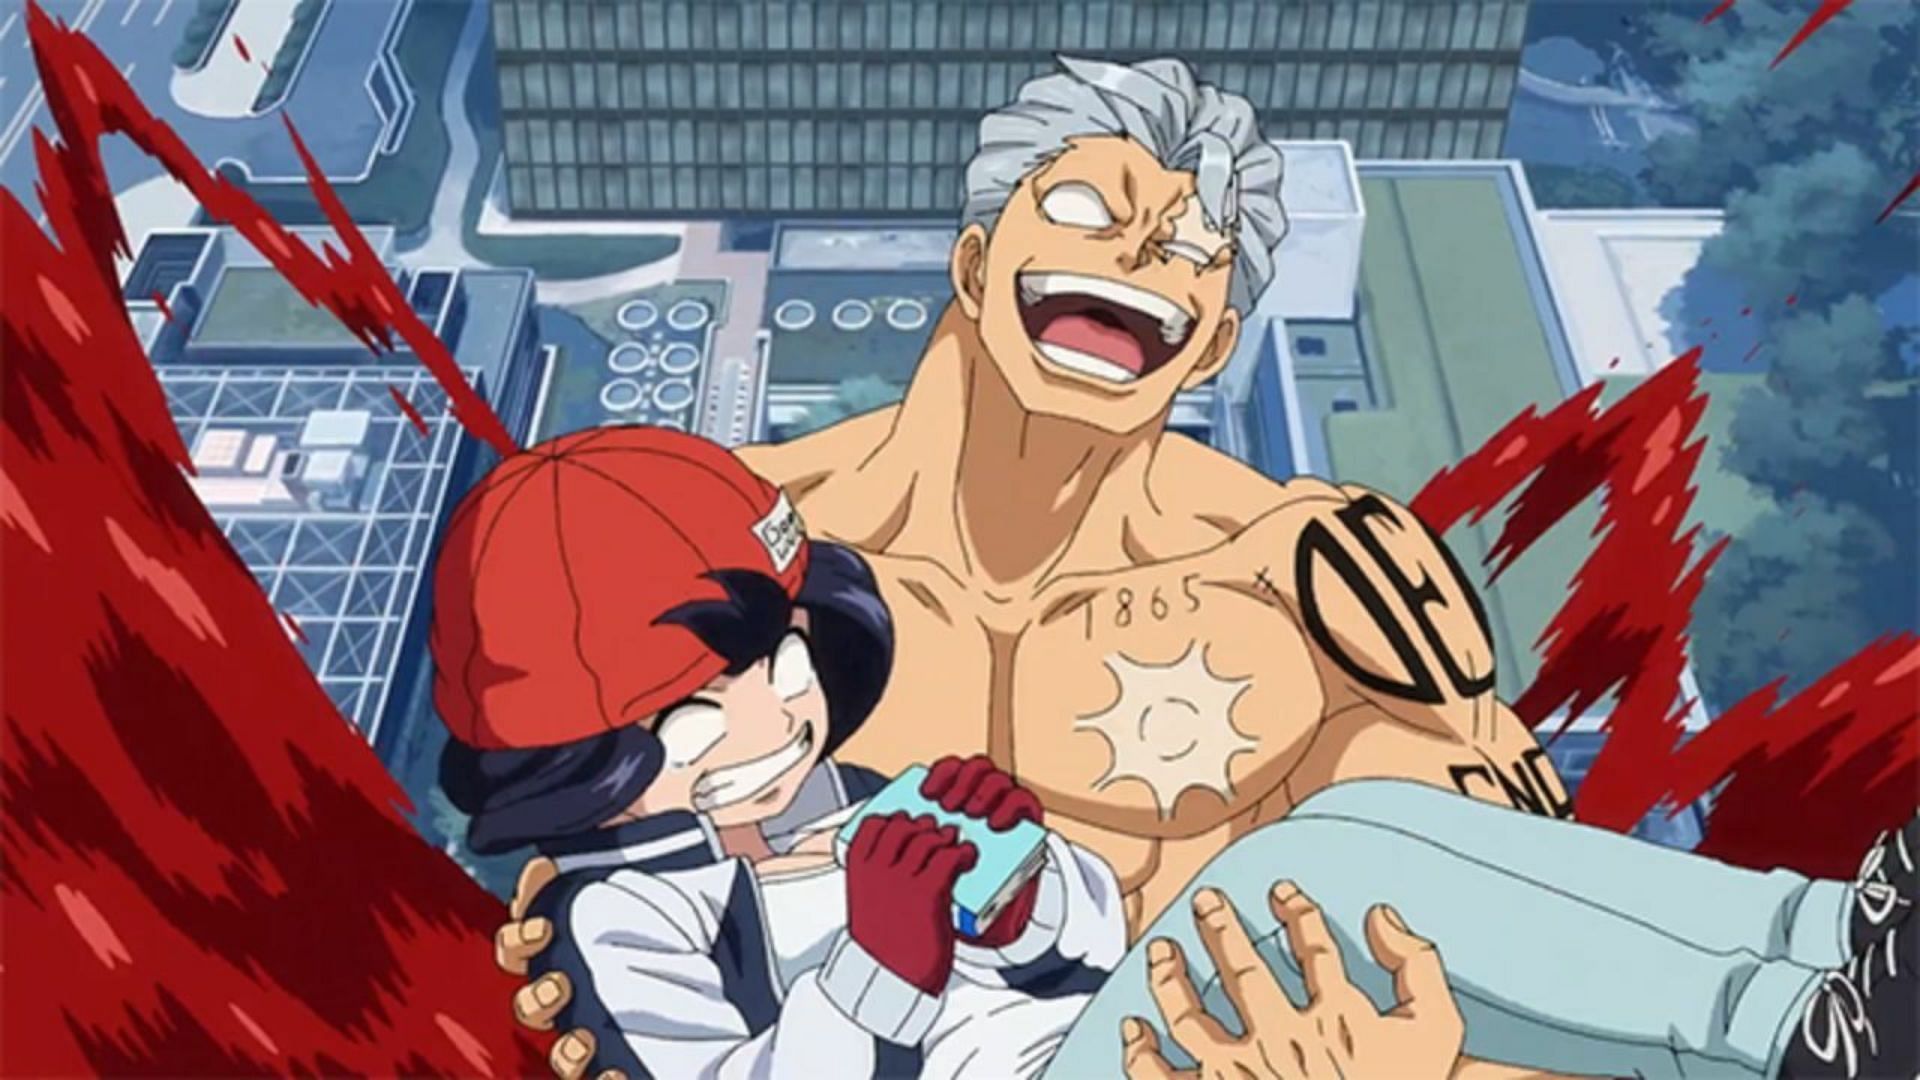 Fuuko and Andy as seen in Undead Unluck anime (Image via David Production)